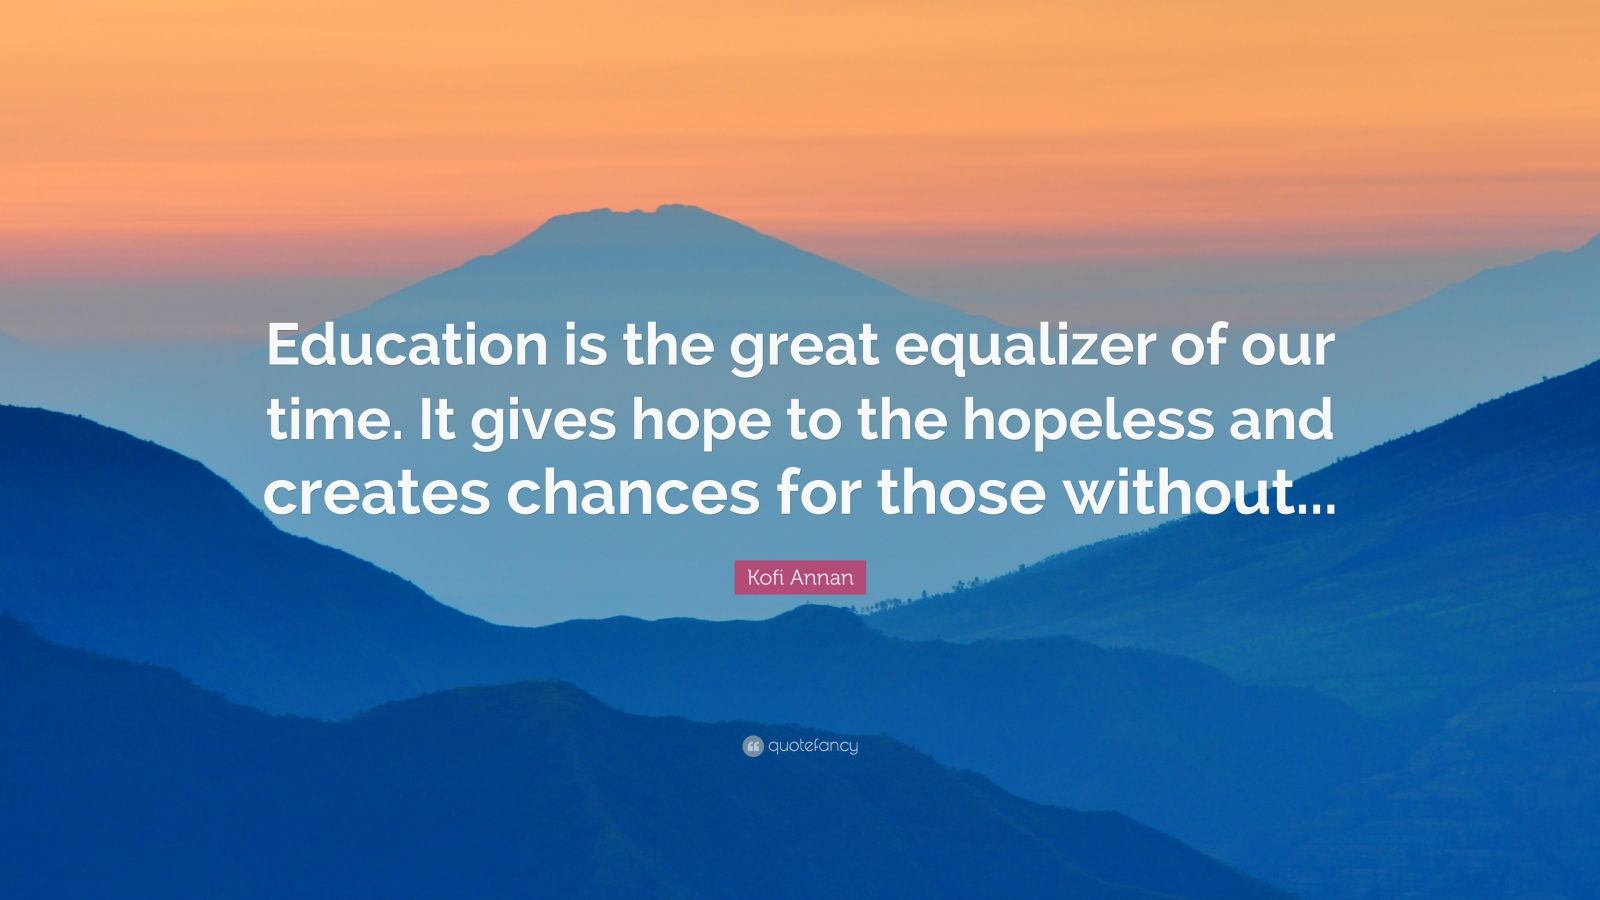 Kofi Annan Quote: “Education is the great equalizer of our time. It